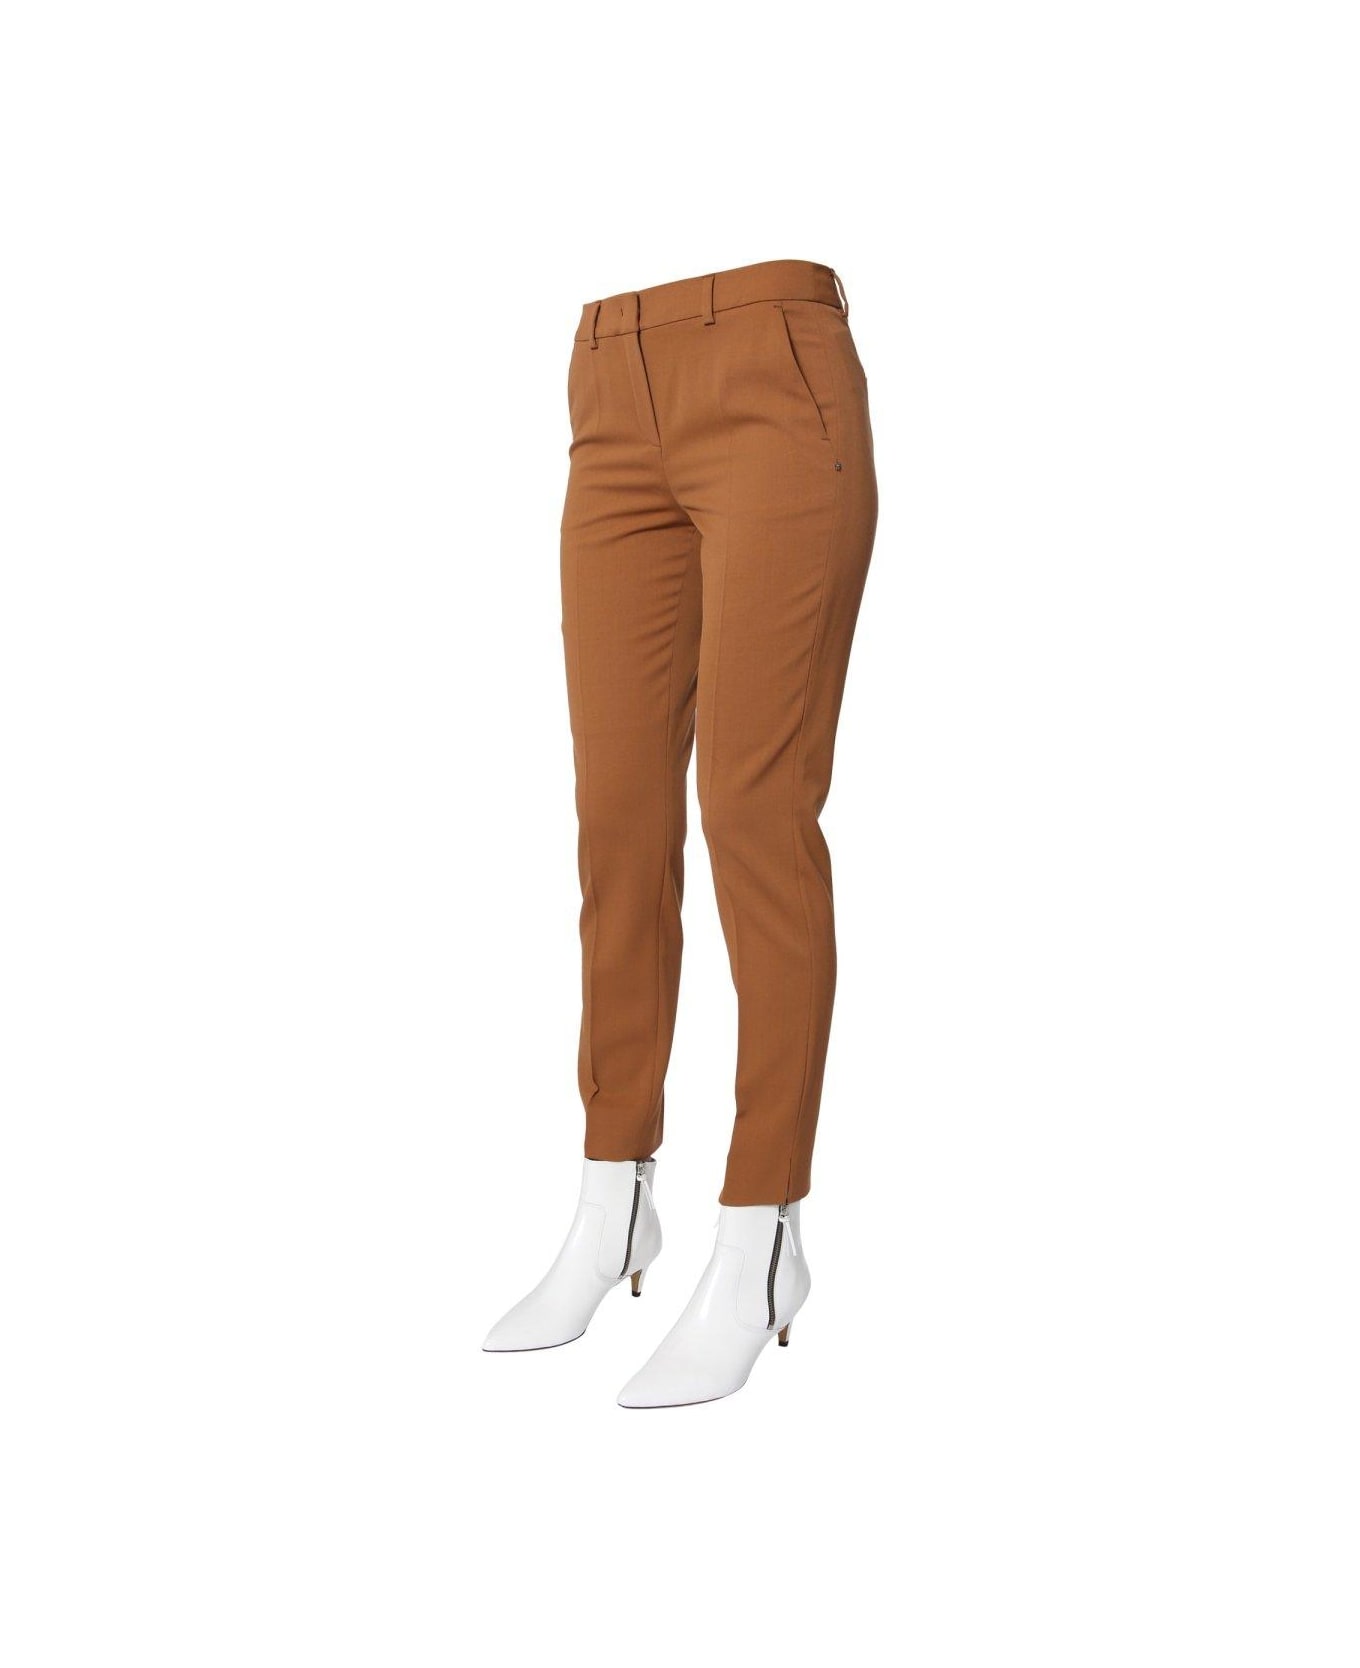 Max Mara Straight Leg Cropped Trousers - BROWN ボトムス